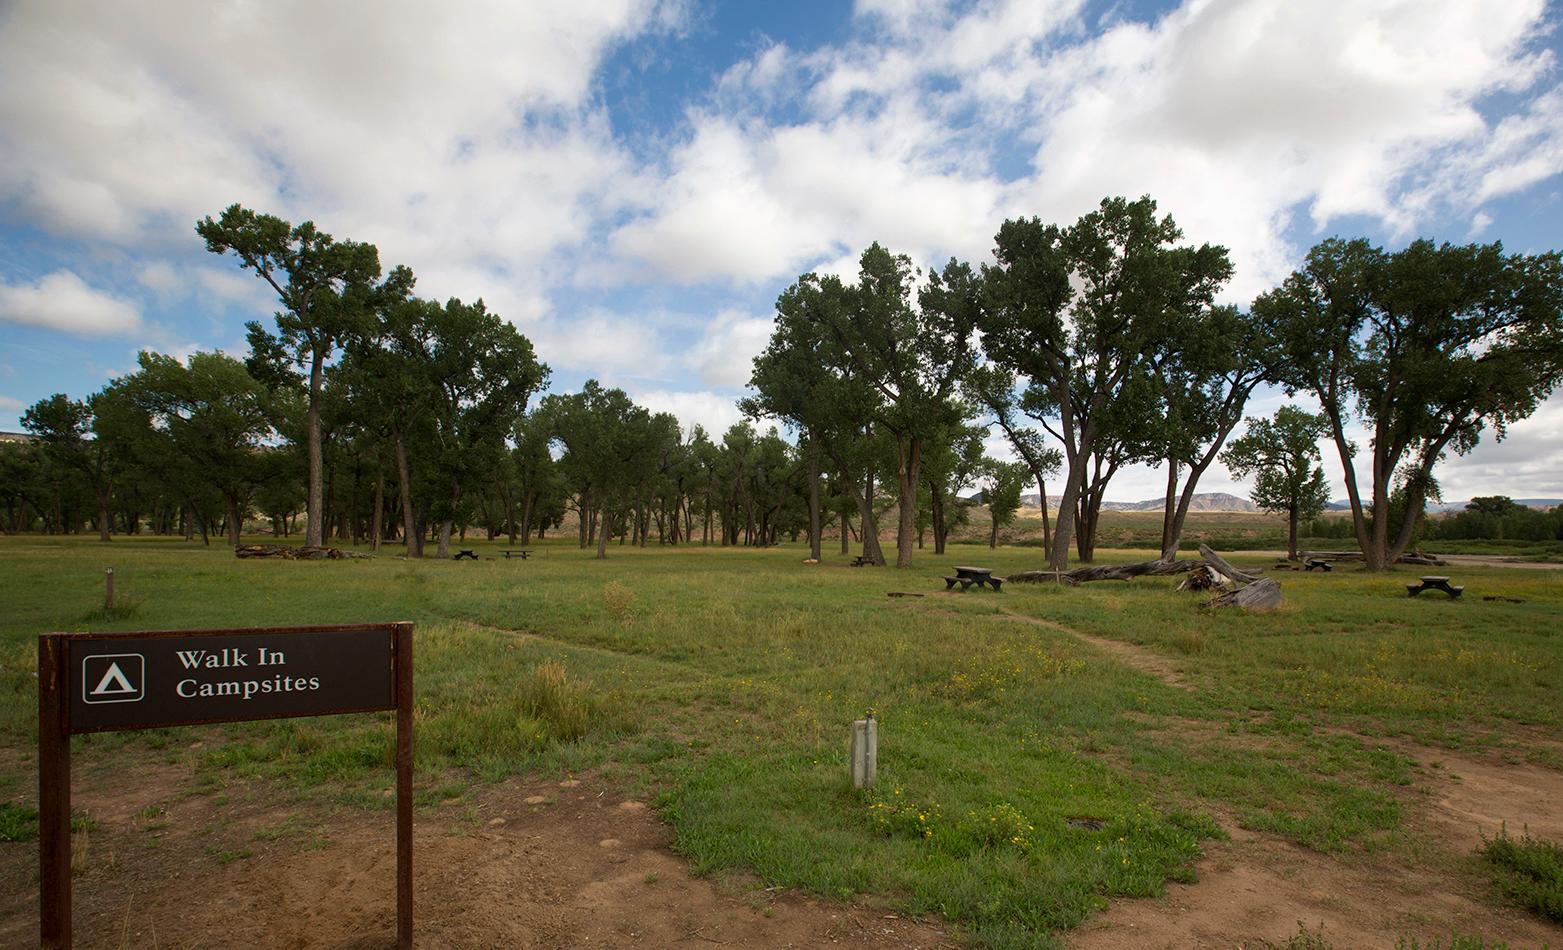 Sign with Walk In Campsites in front of grassy field surrounded by tall trees